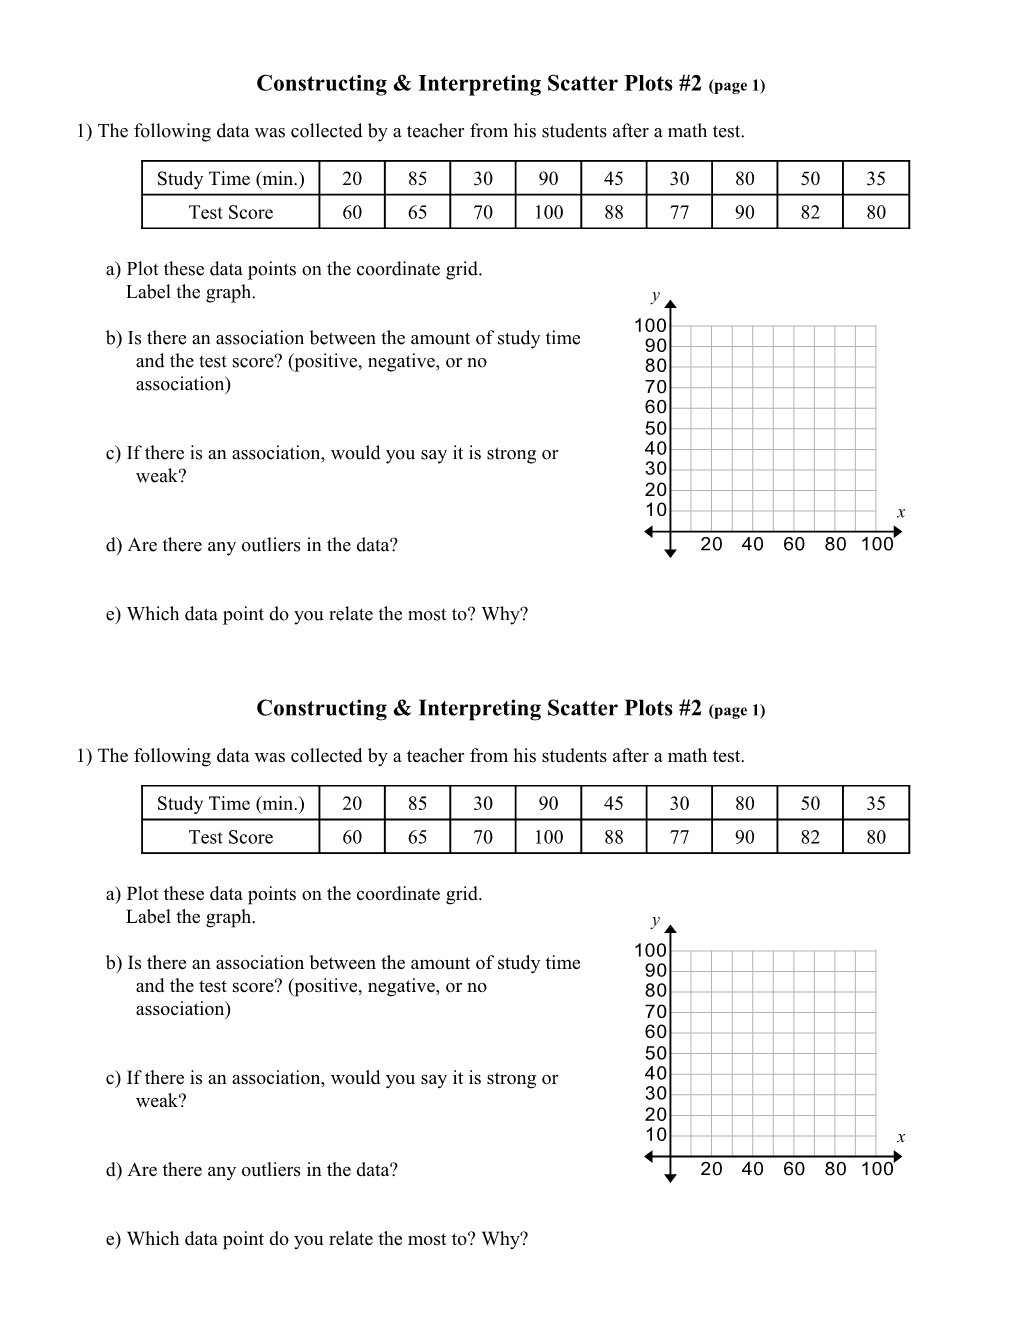 Constructing & Interpreting Scatter Plots #2 (Page 1)